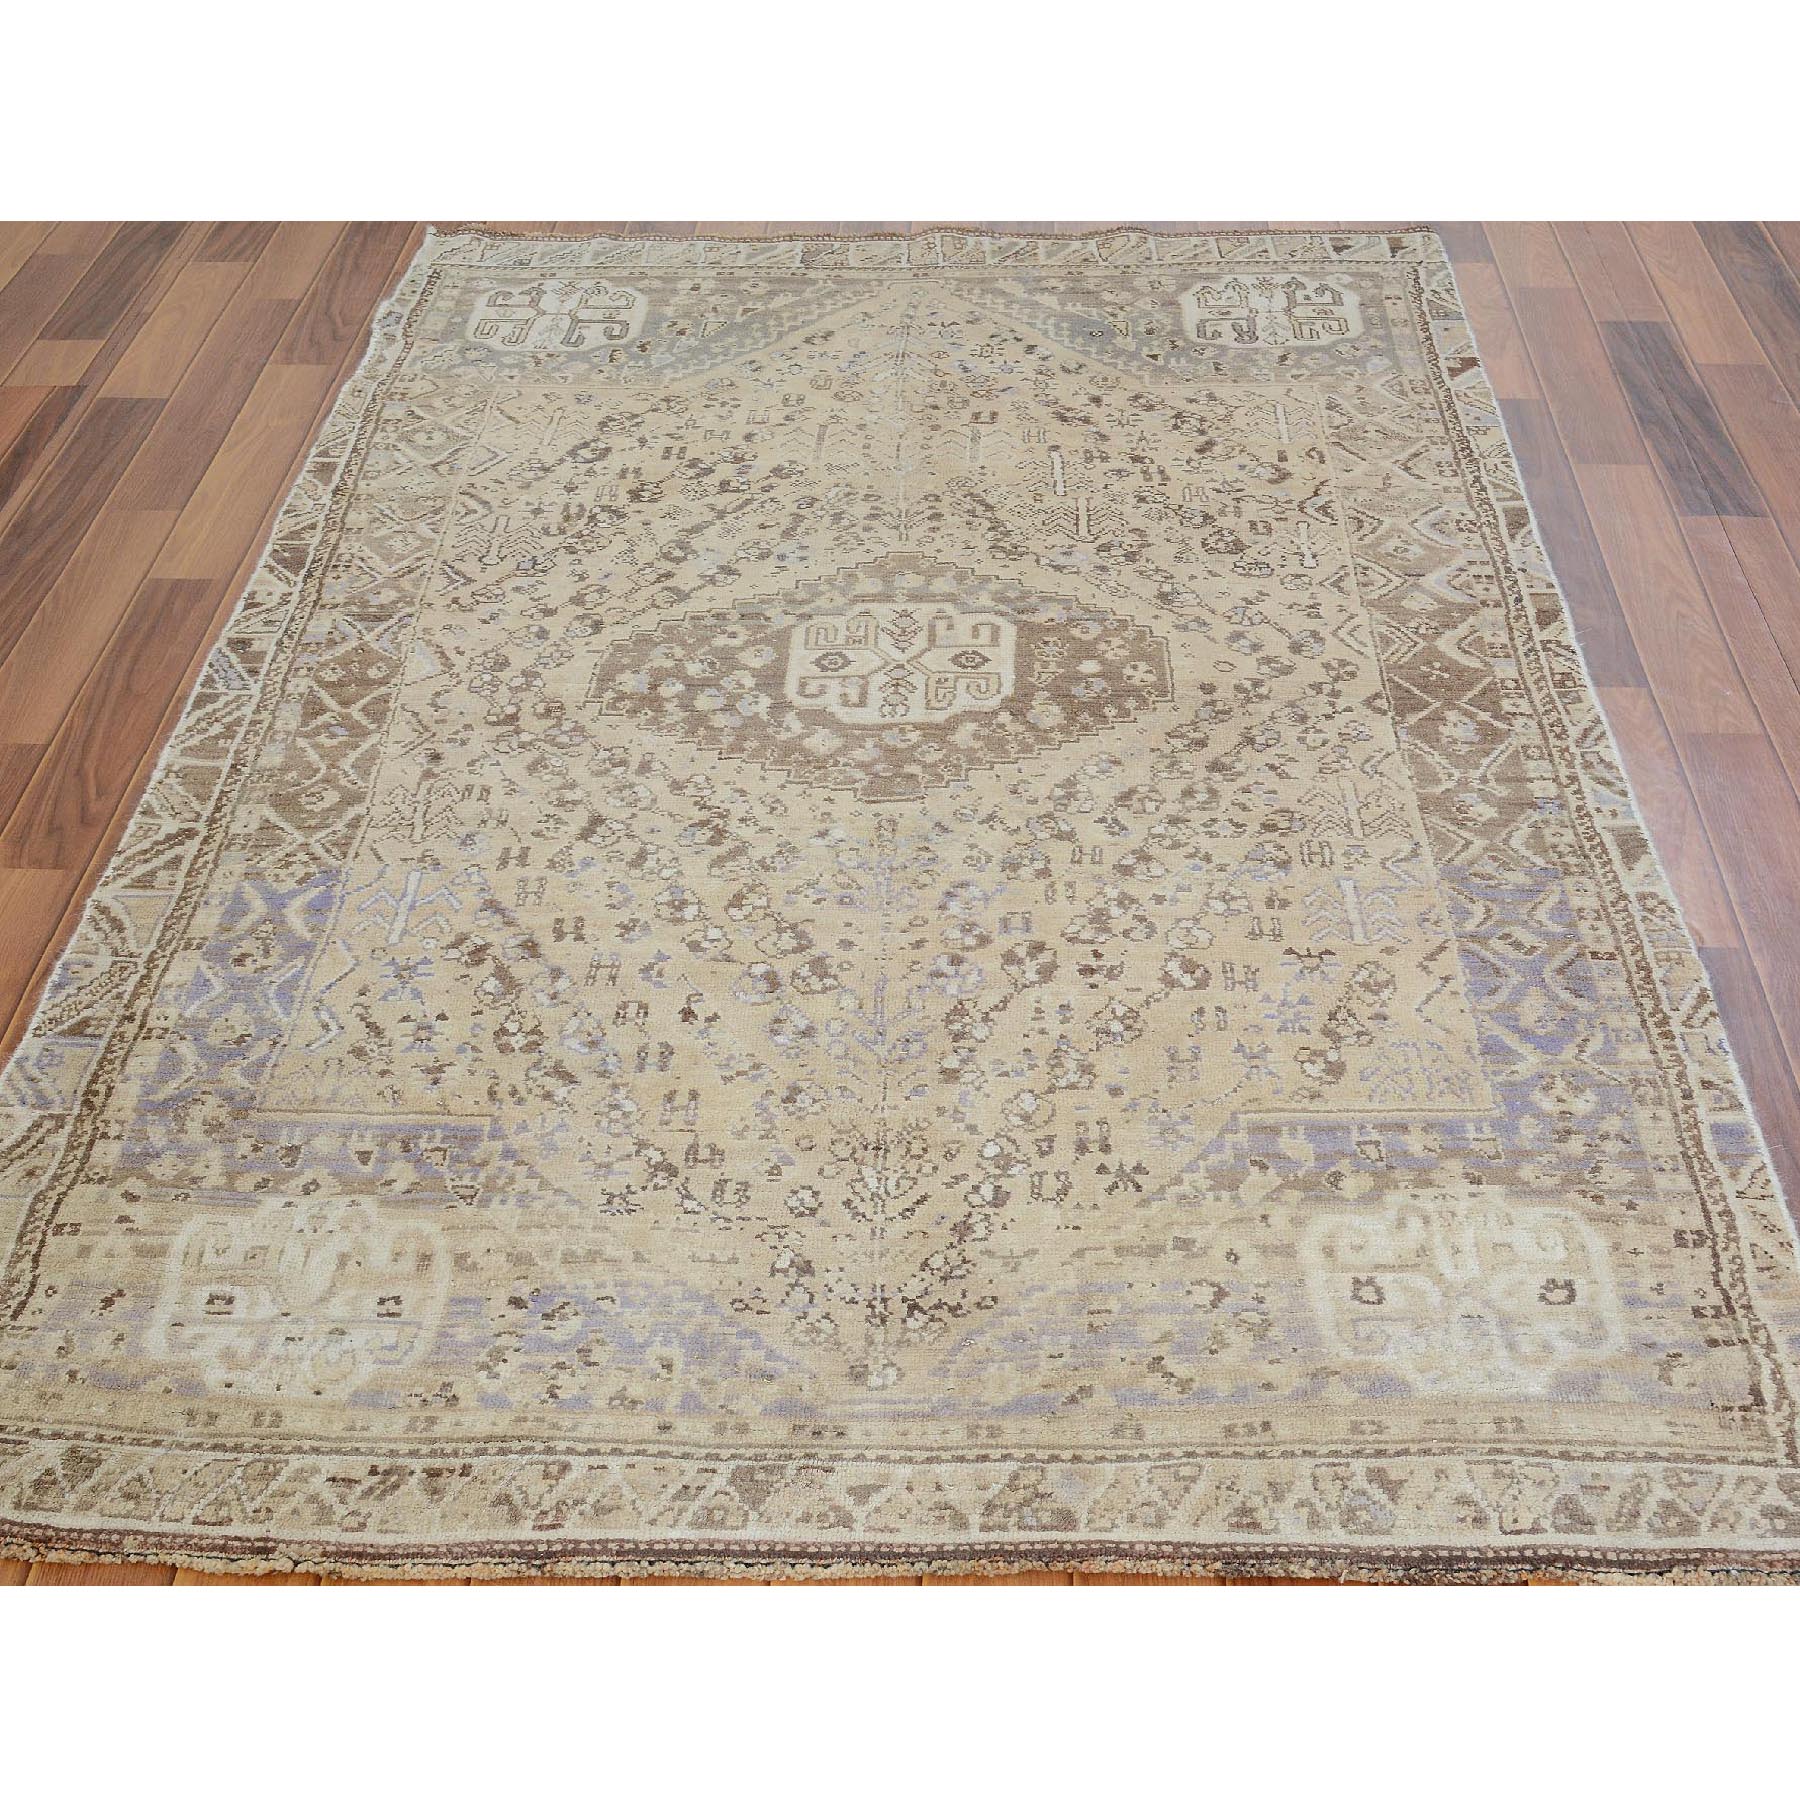 4-4 x7-4  Distressed Colors Vintage And Worn Down Persian Shiraz Pure Wool Bohemian Rug 